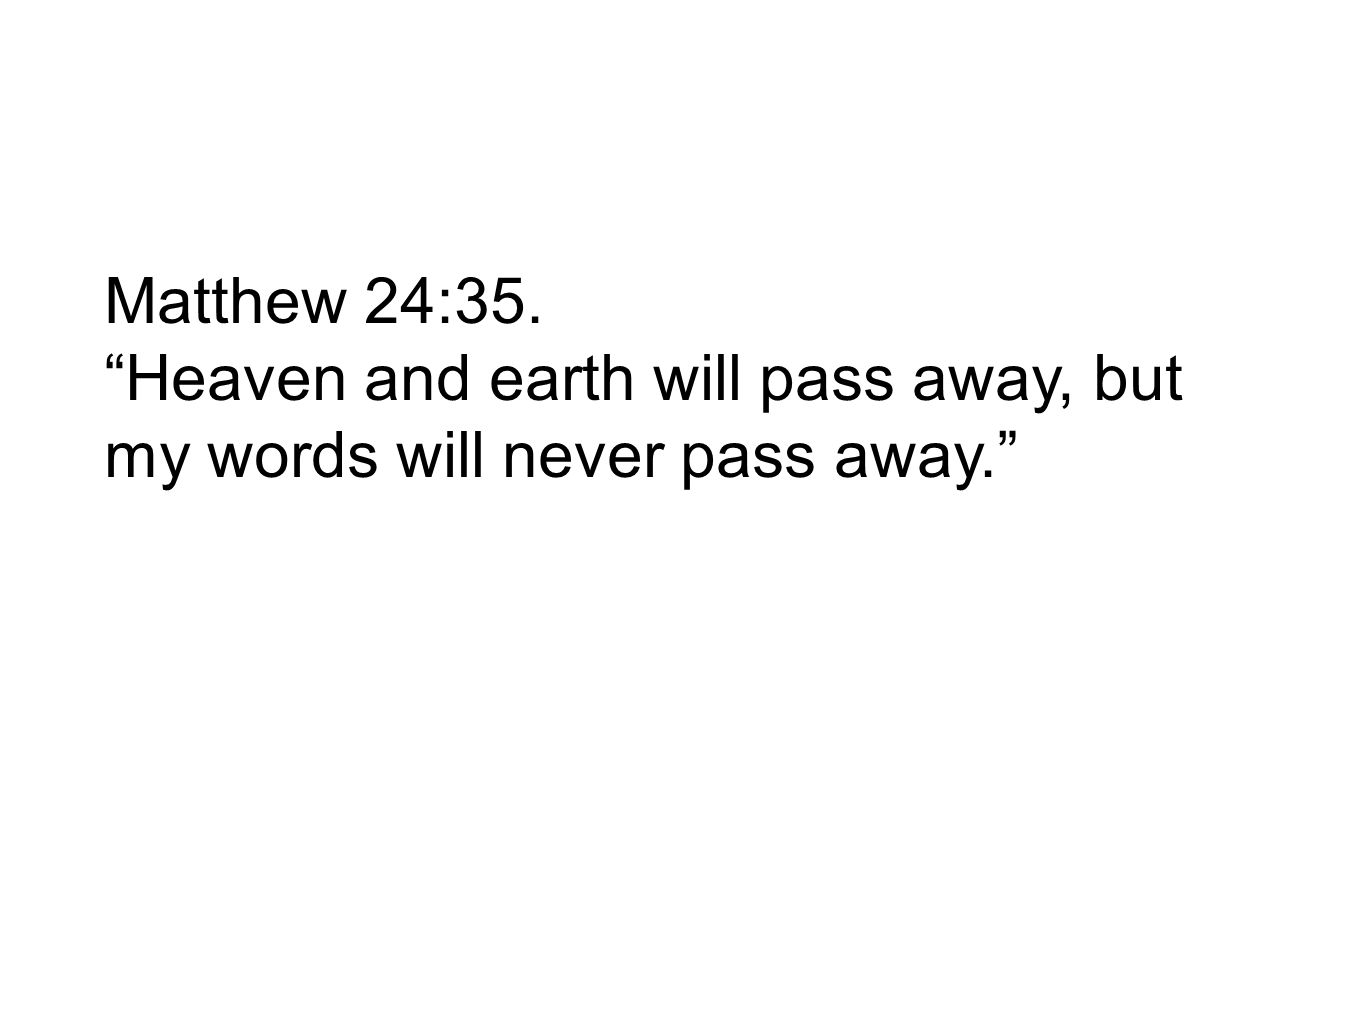 Matthew 24:35. Heaven and earth will pass away, but my words will never pass away.